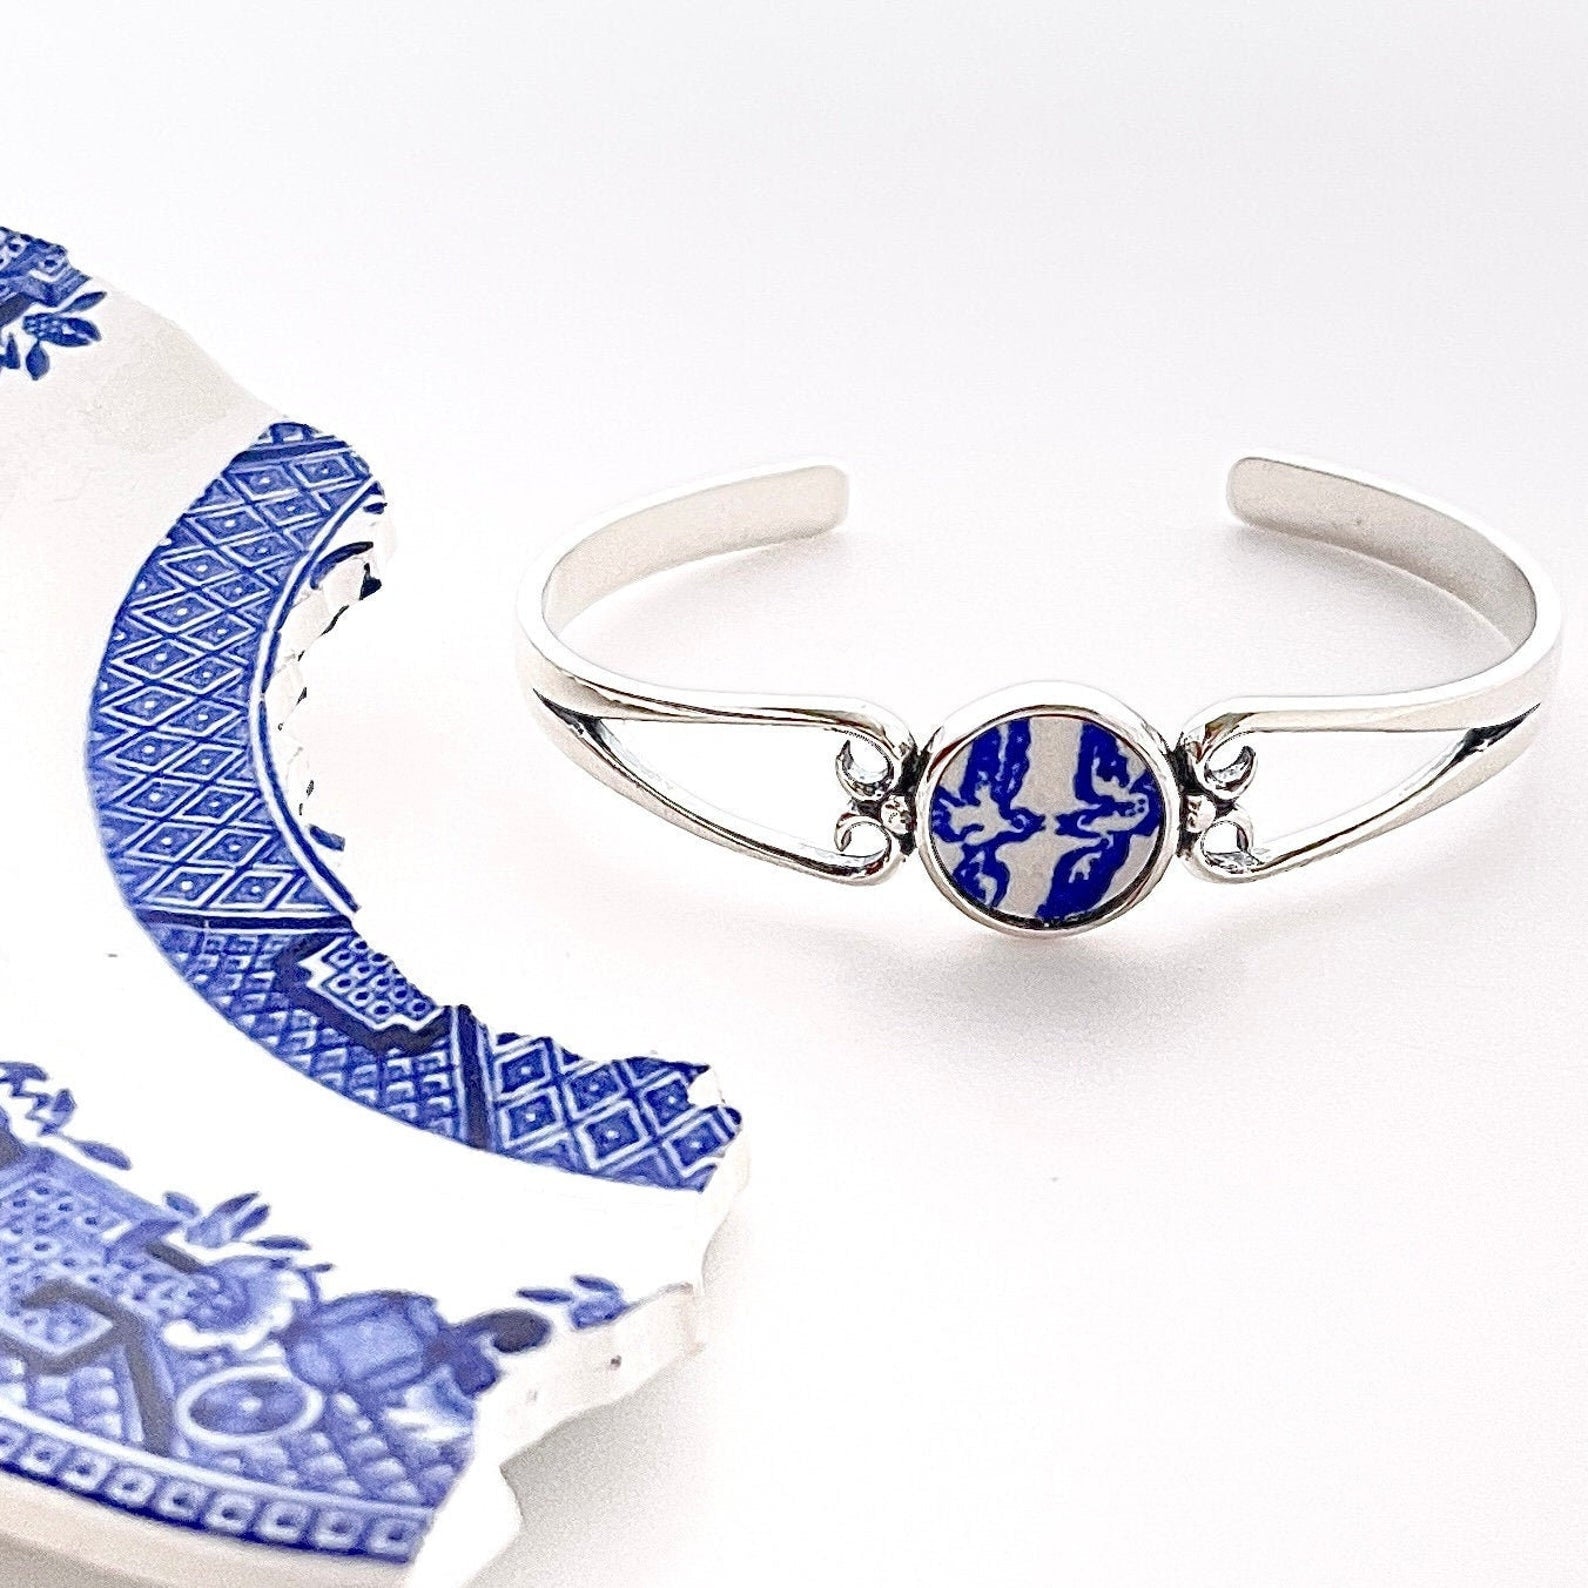 9th Anniversary Gift for Wife, Blue Willow Love Birds Broken China Jewelry, Dainty Sterling Silver Cuff Bracelet